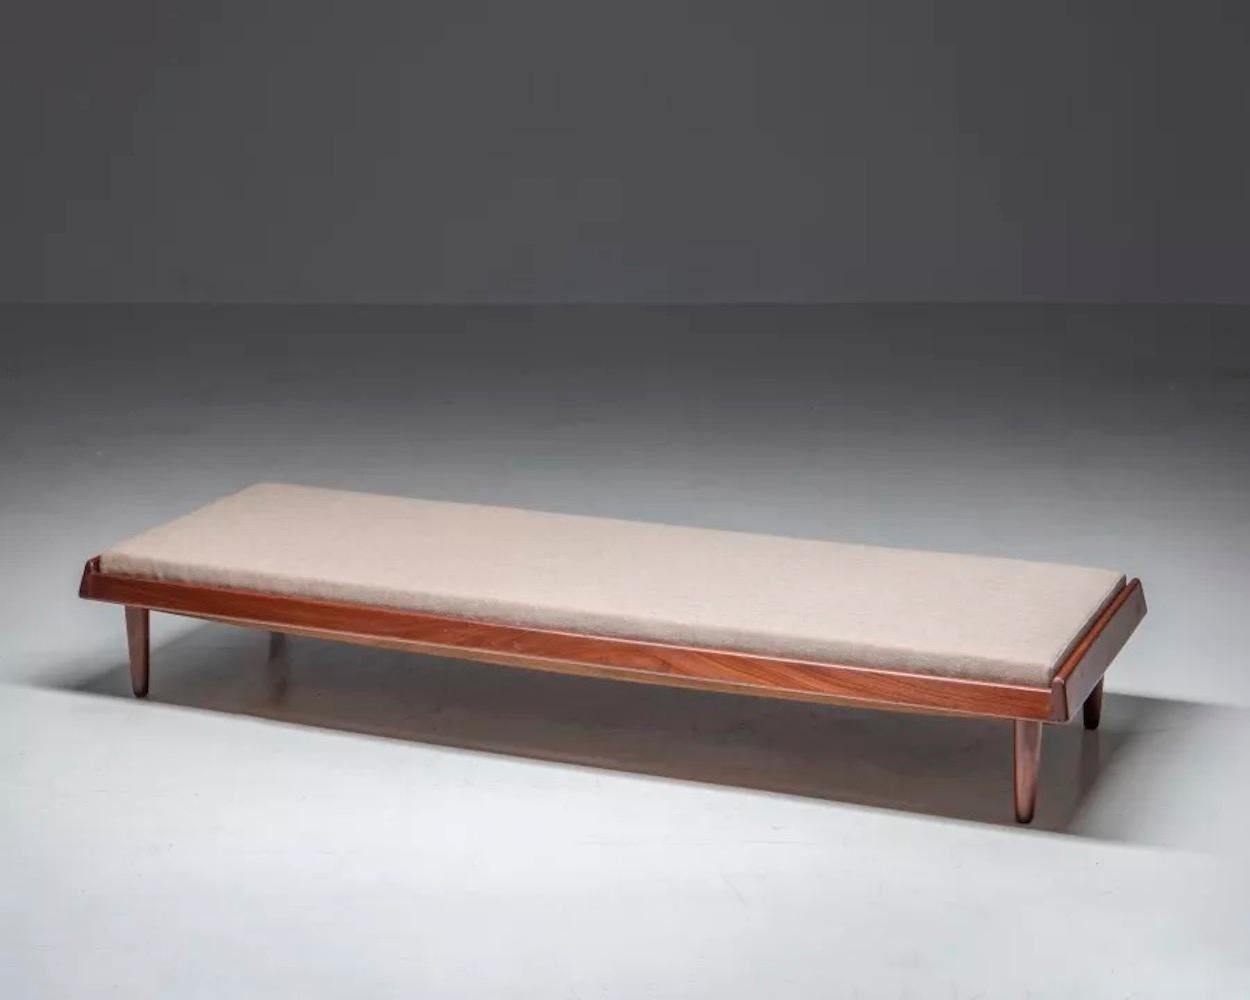 Daybed 'Model 161' in solid teak, designed in 1957 by Hans Olsen for Bramin, Denmark
The mattress has been reupholstered with Main Line Flax by Camira fabrics. Its robust frame has some scratches, but remains in very good condition overall.